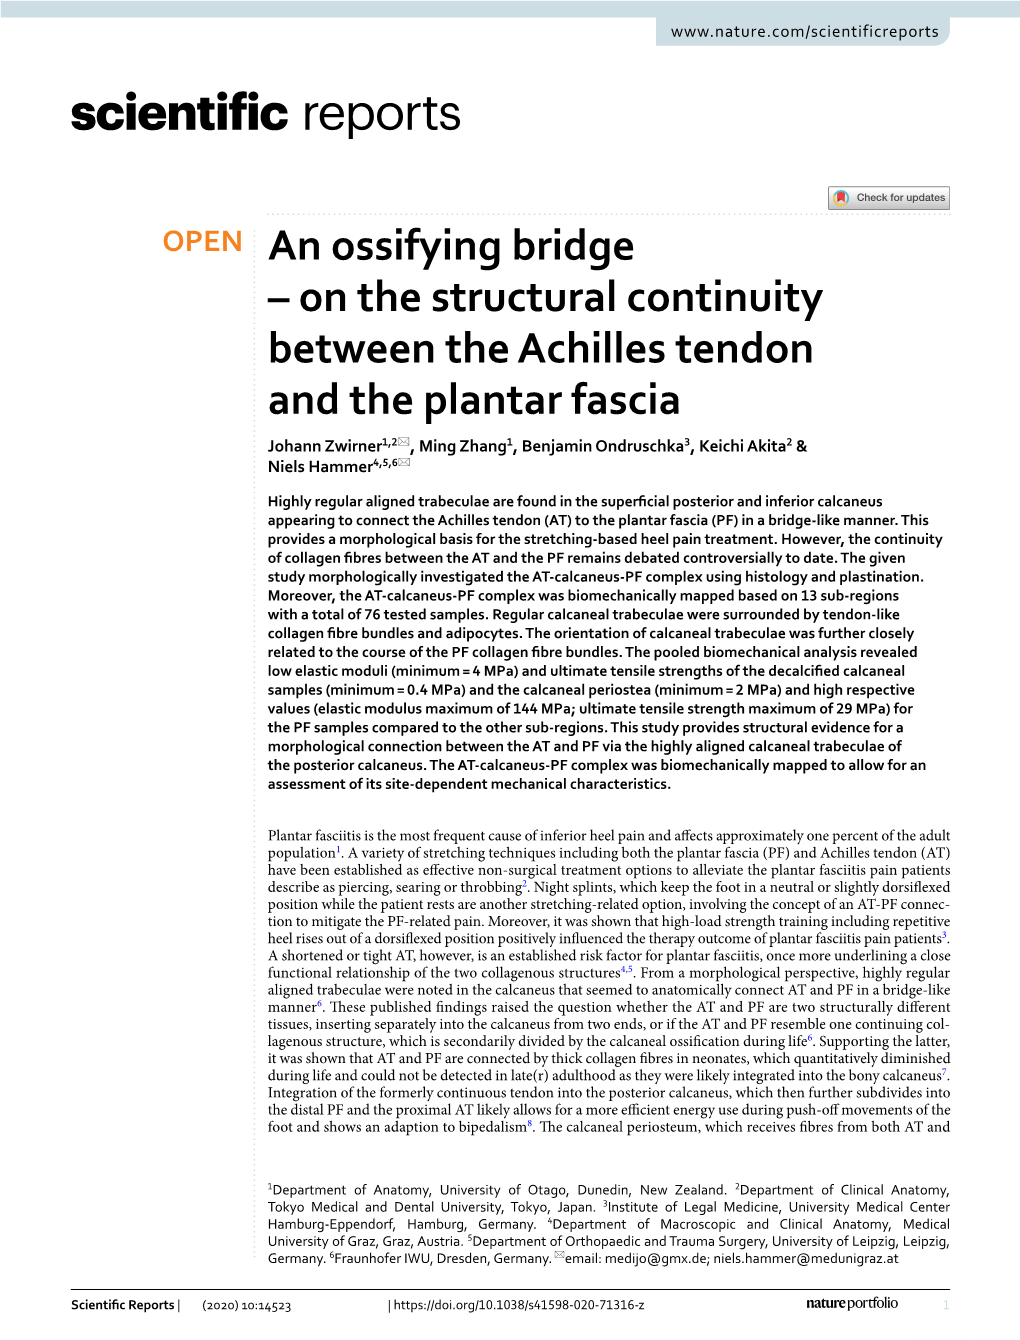 On the Structural Continuity Between the Achilles Tendon and the Plantar